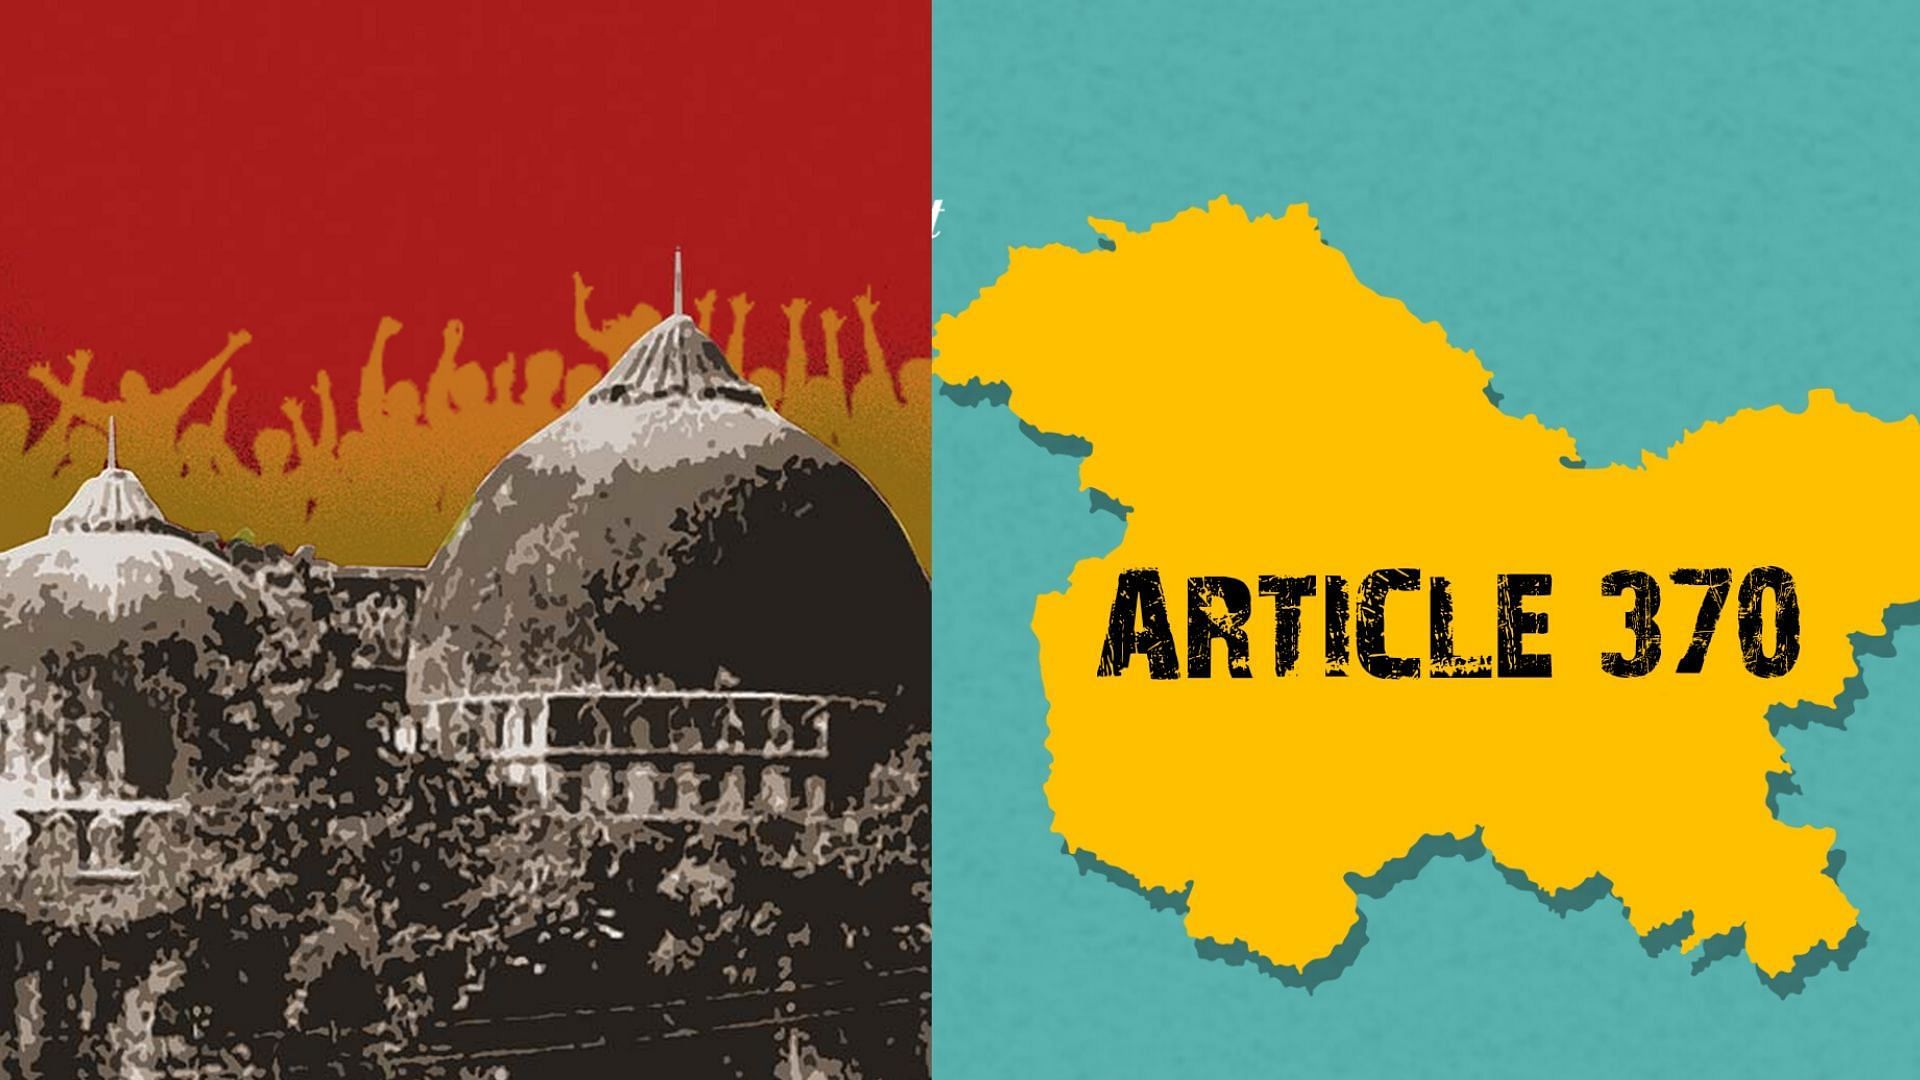 ‘What is Article 370?’, ‘What is Ayodhya case?’ and ‘What is National Register of Citizens of India?’ were among the most asked questions from Indians on Google this year.